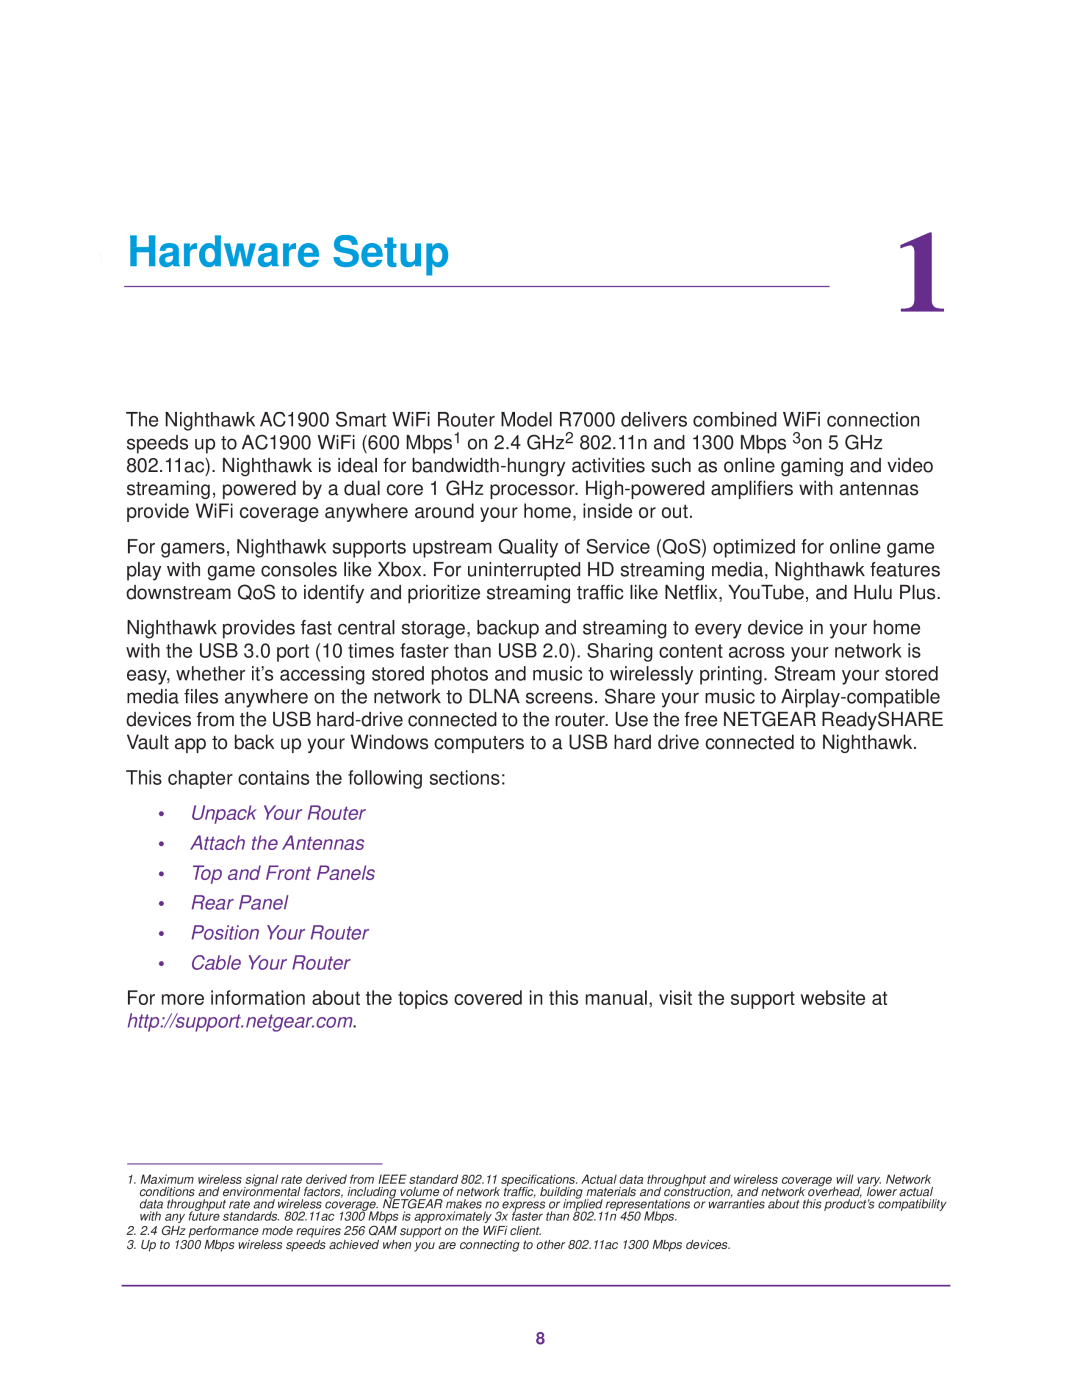 NETGEAR R7000 user manual Hardware Setup, Unpack Your Router Attach the Antennas Top and Front Panels 